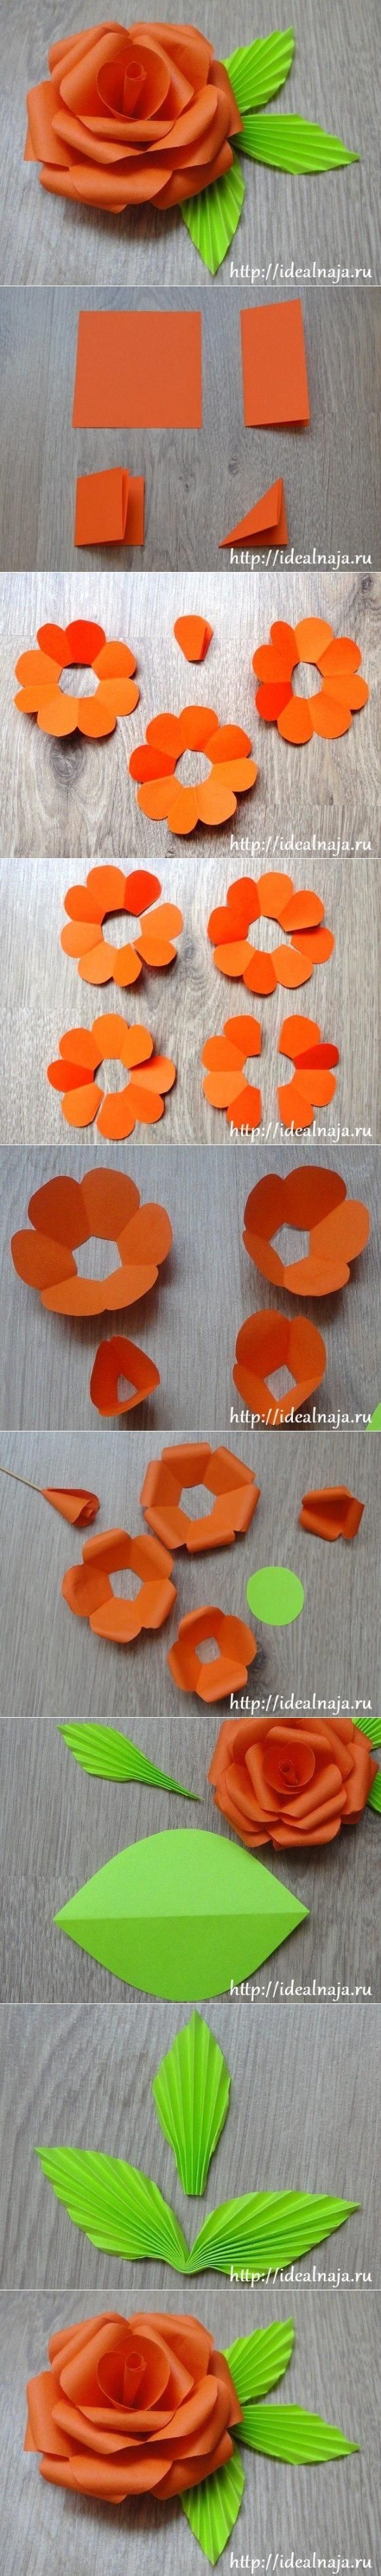 DIY Flowers Pictures, Photos, and Images for Facebook, Tumblr, Pinterest, and Twitter